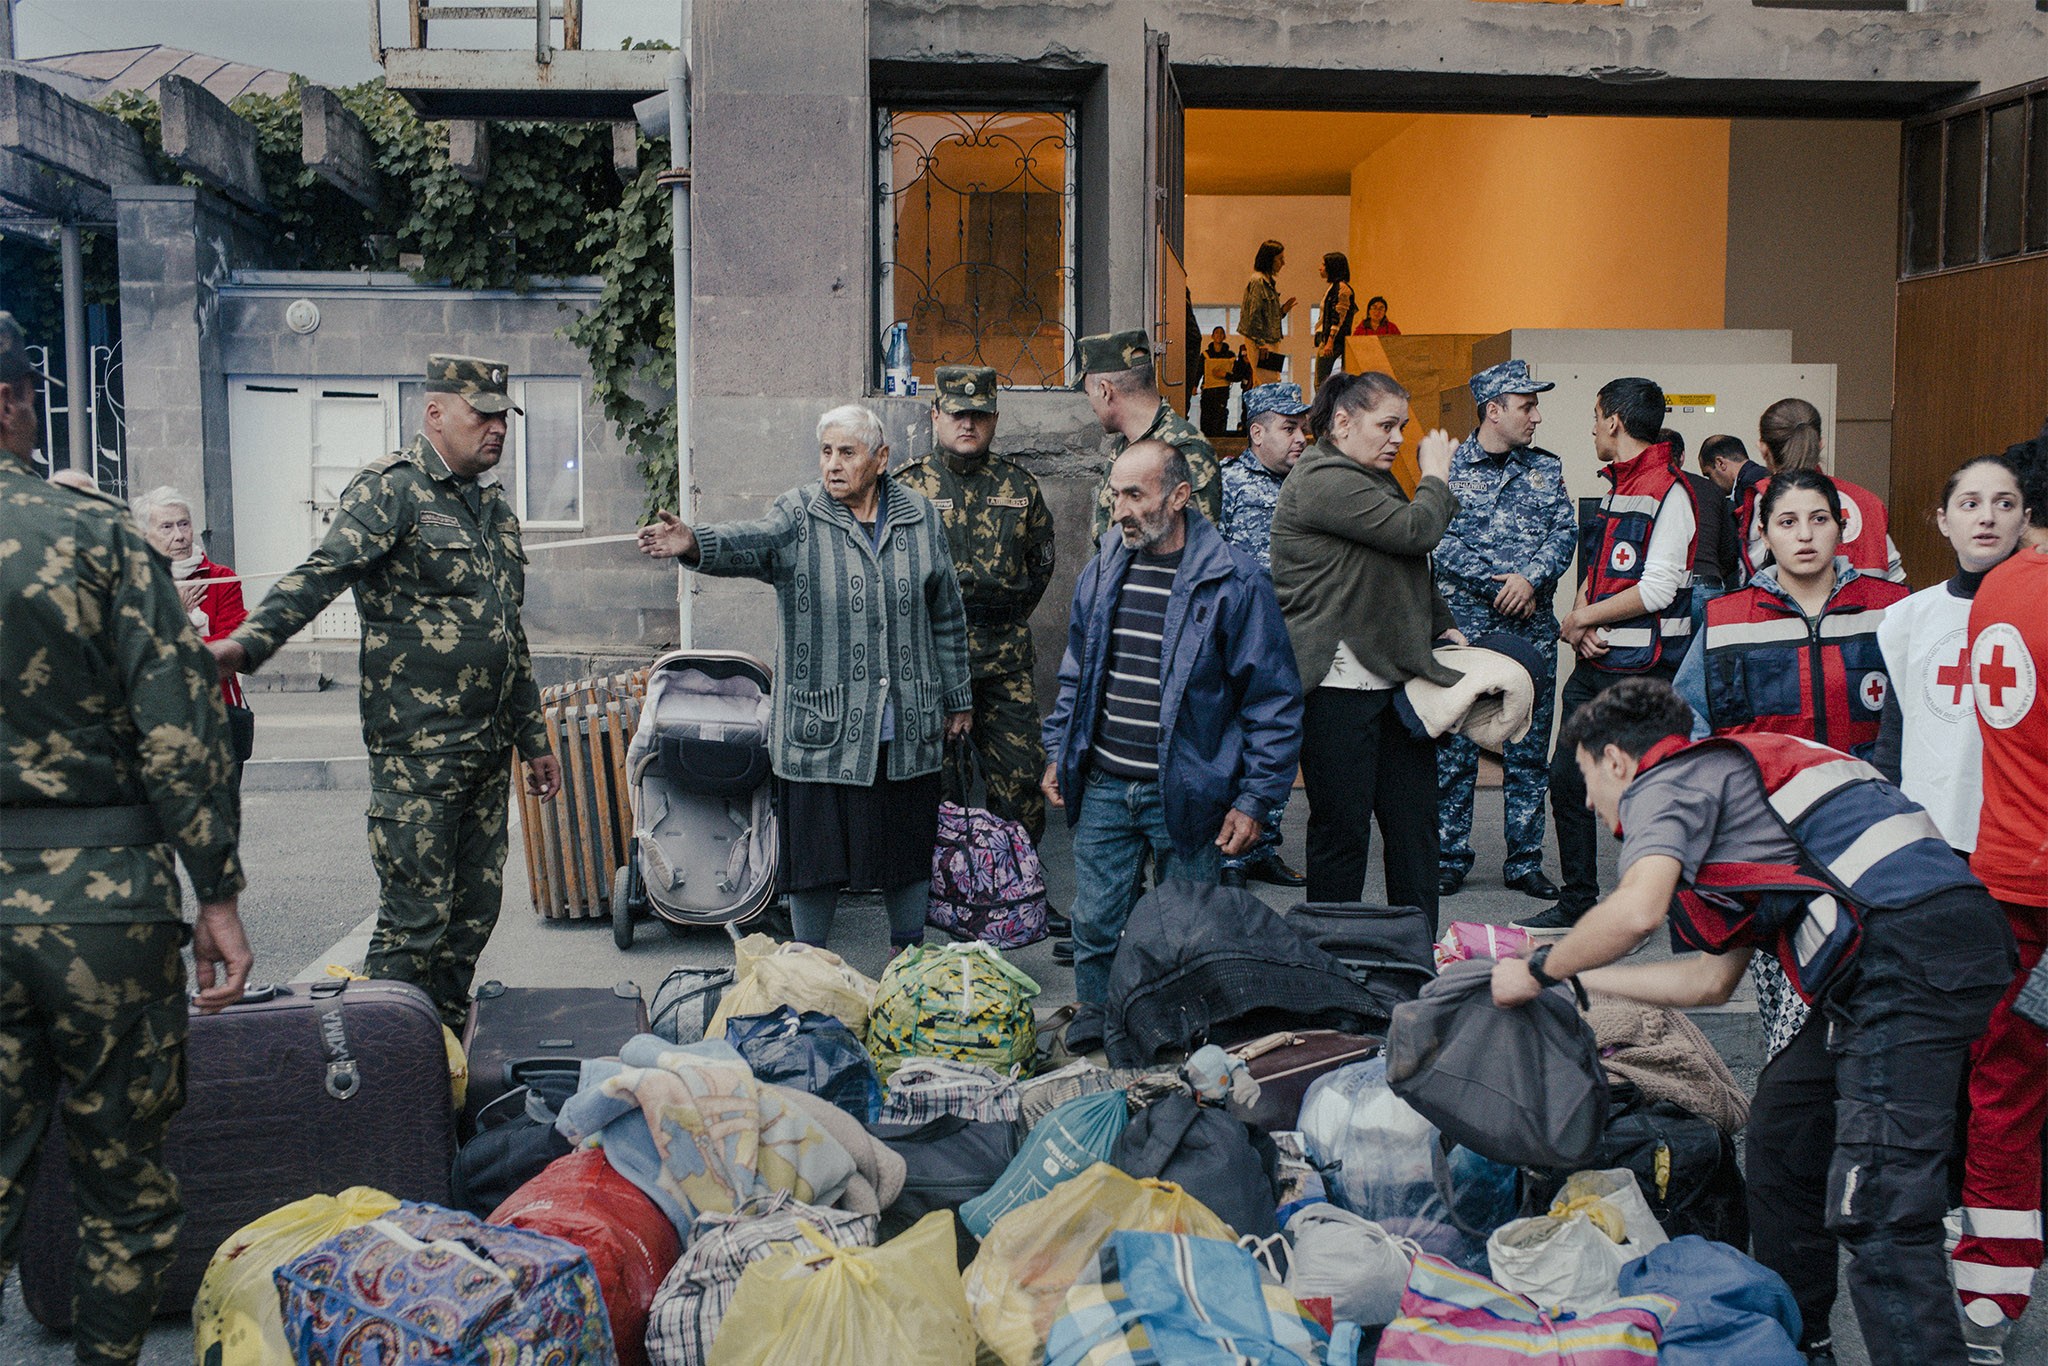 Refugees from Nagorno-Karabakh reach Goris, Armenia, this week. More than half of Nagorno-Karabakh’s Armenian residents have fled Azerbaijan’s sudden seizure of the enclave, raising the specter of ethnic cleansing. (Nanna Heitmann/The New York Times)